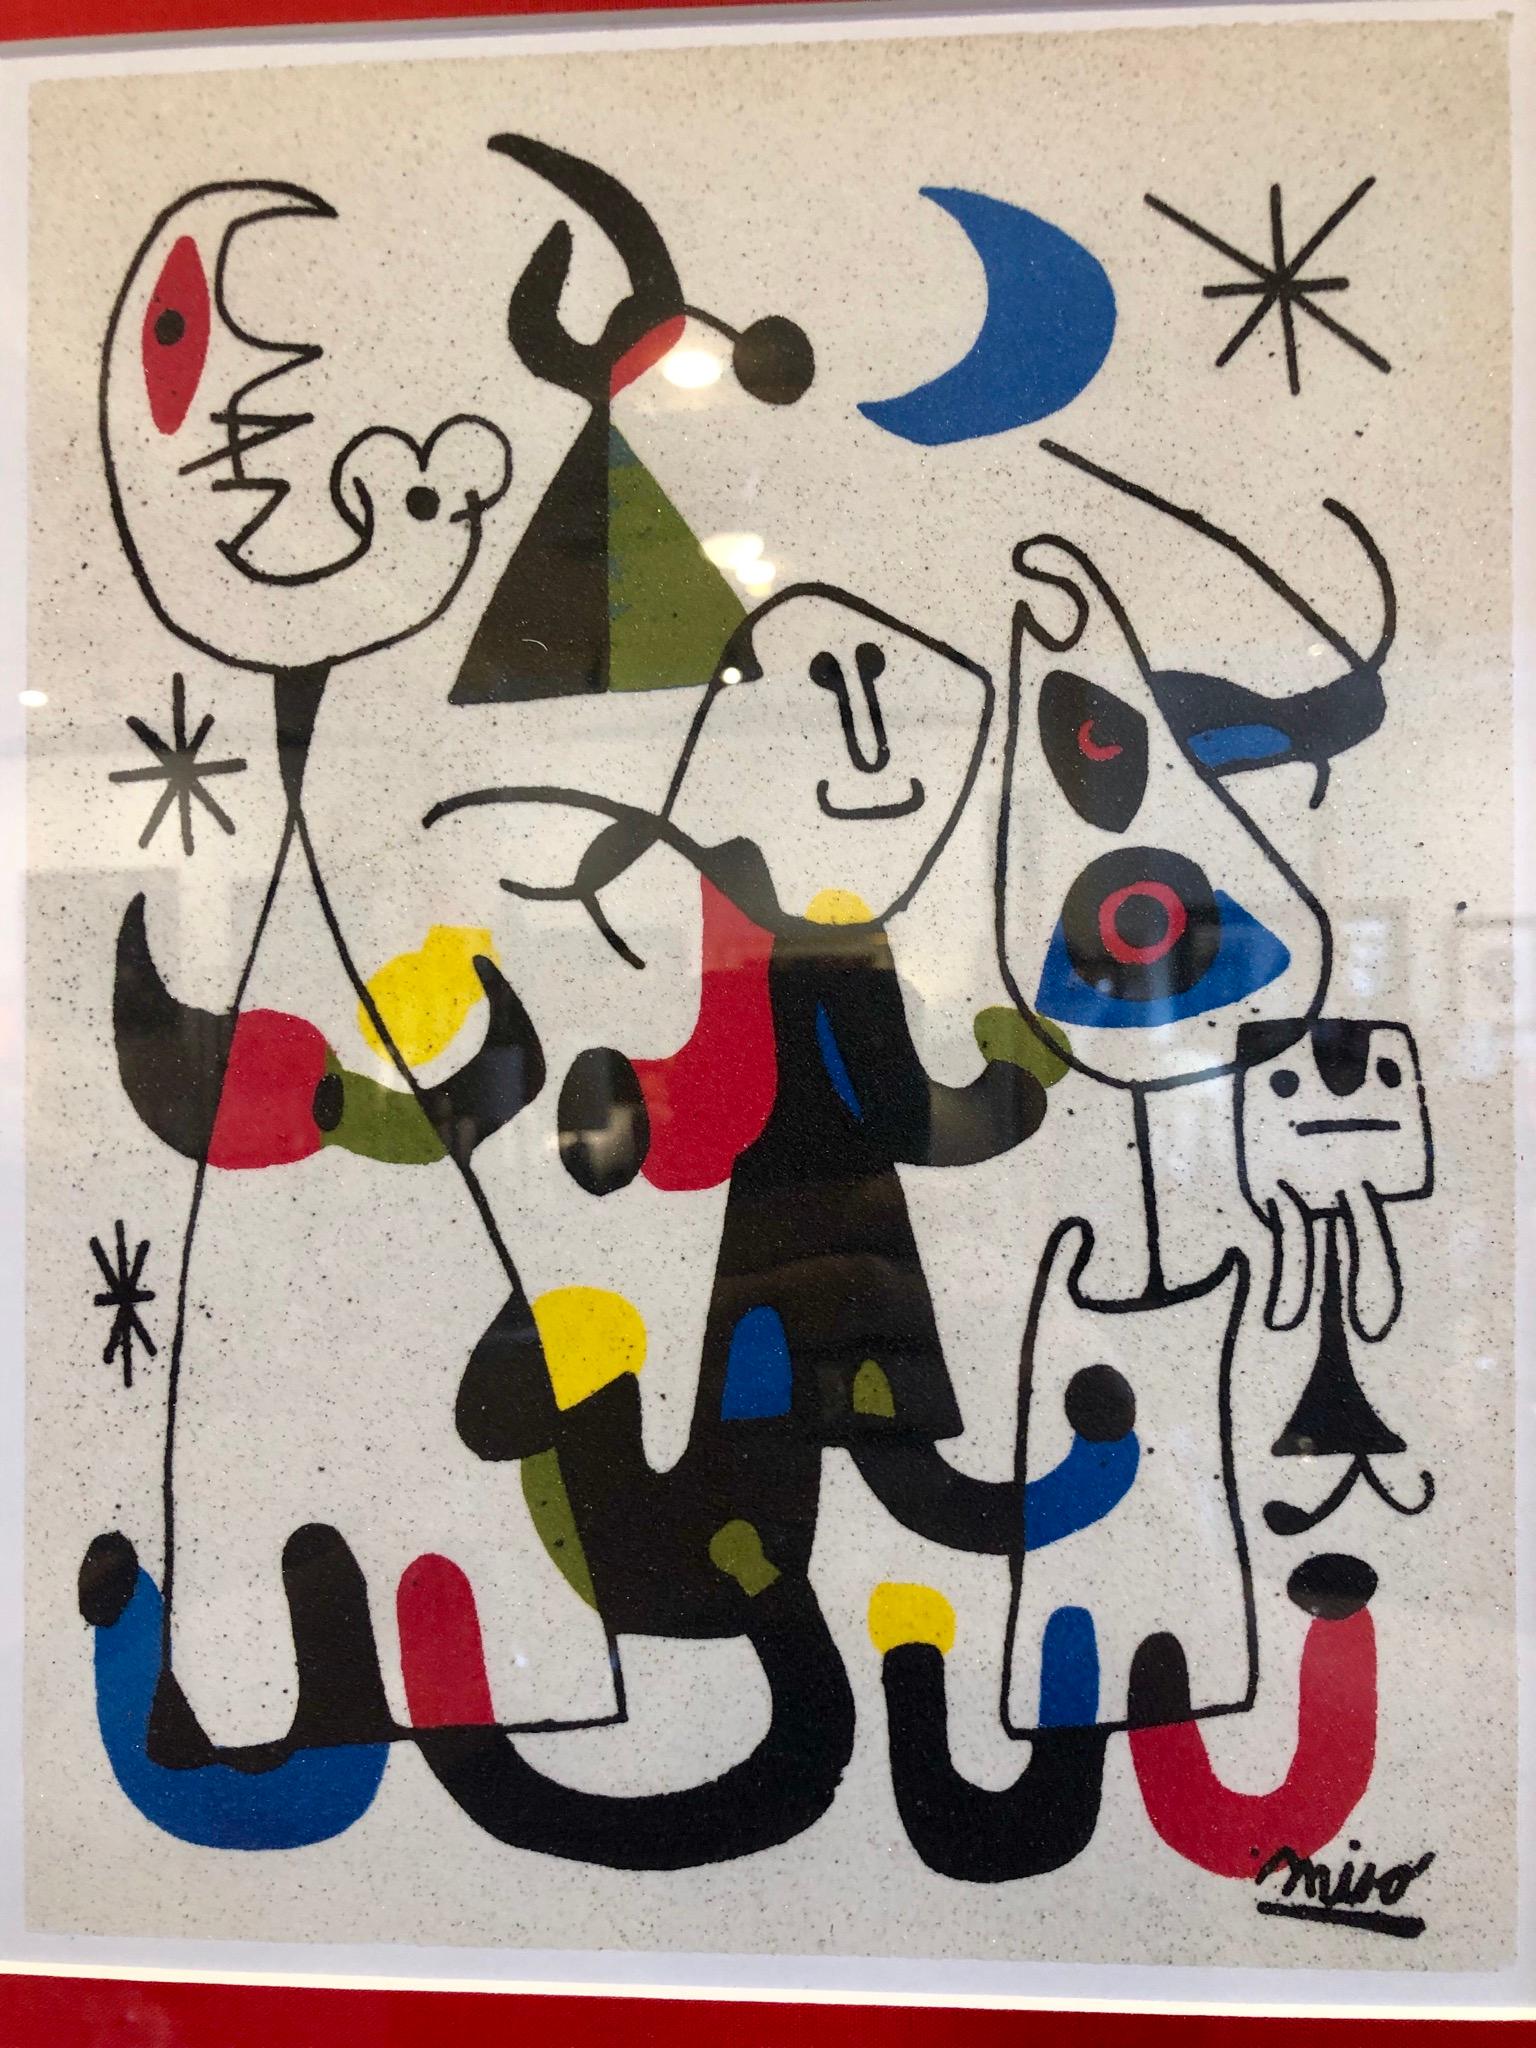 Beautiful Miro reproduction printed on marble dust paper, rare one of a kind hand finished and freshly framed.